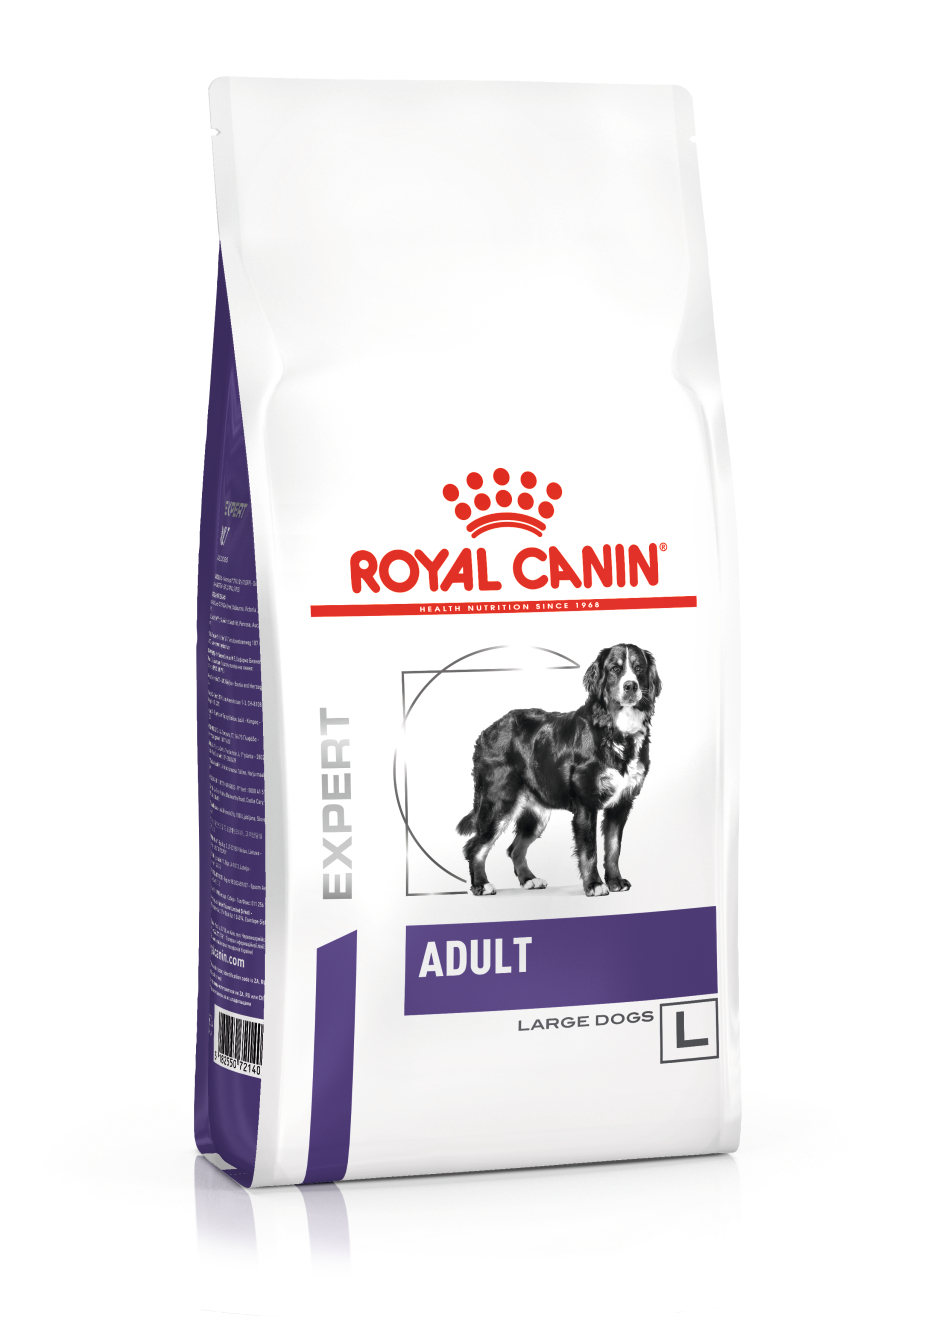 Royal Canin Veterinary Diet VCN Dog Adult Large